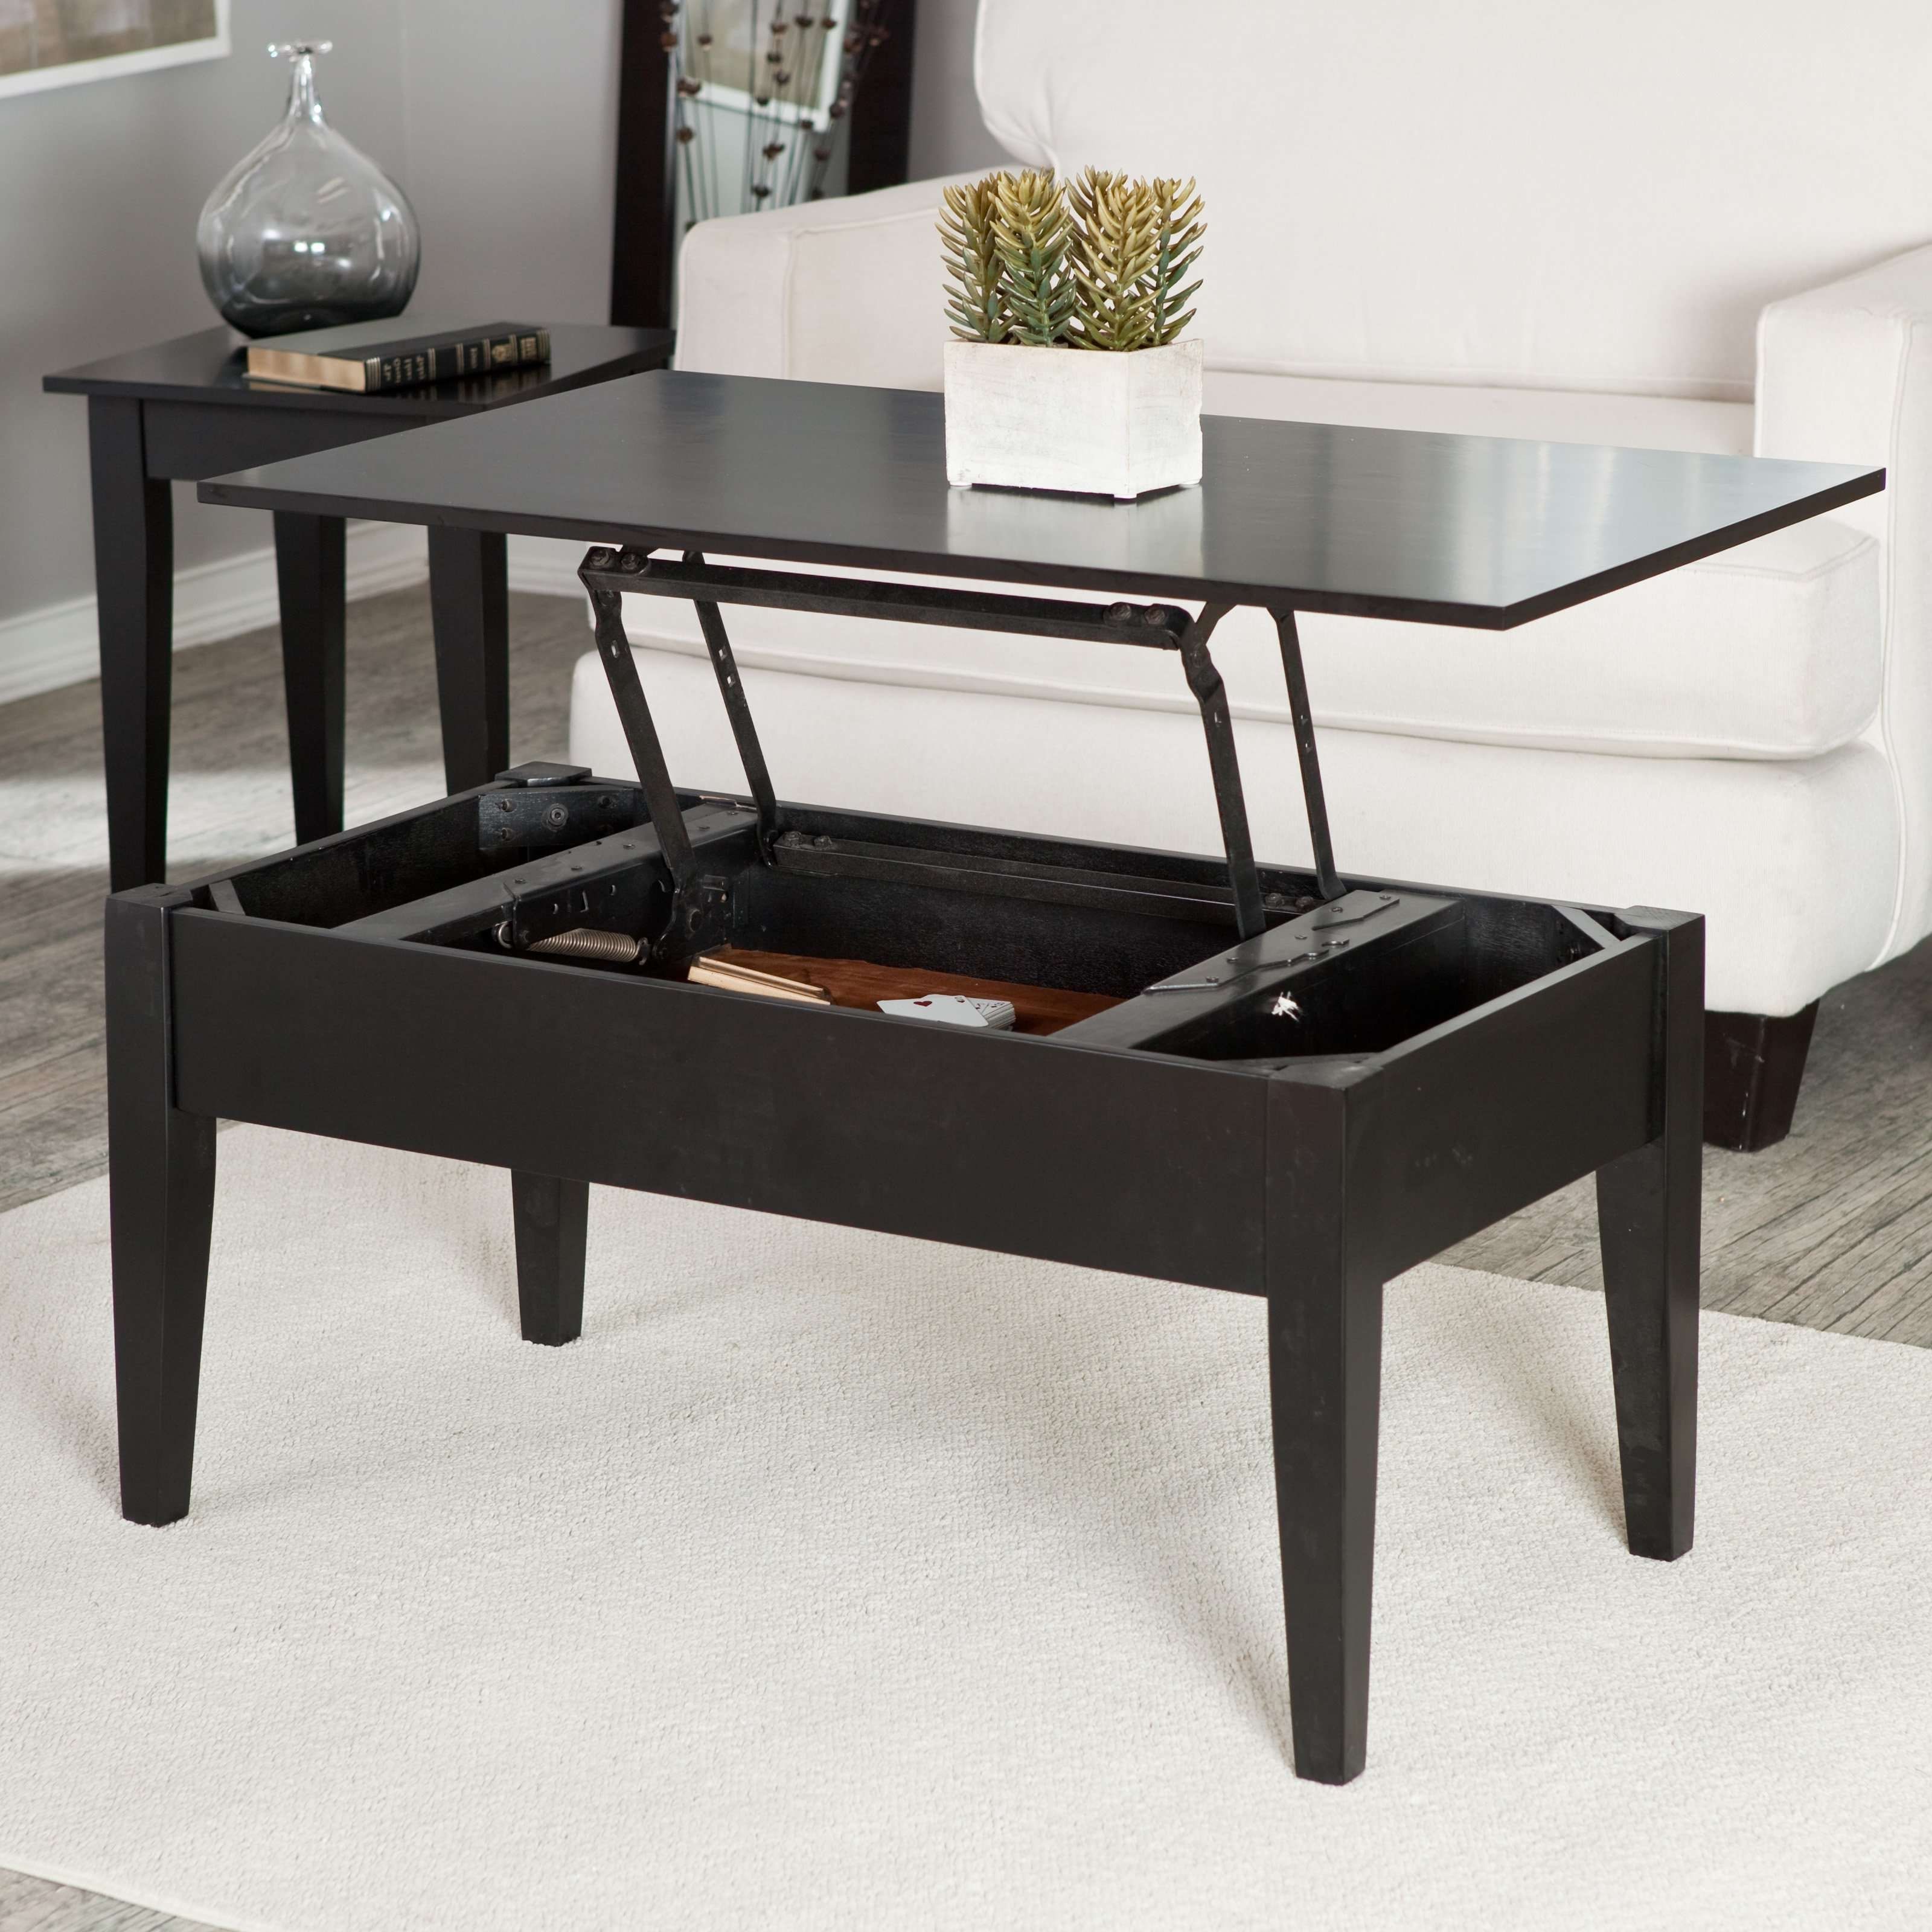 Well Known Coffee Tables Top Lifts Up In Turner Lift Top Coffee Table – Black (View 1 of 20)